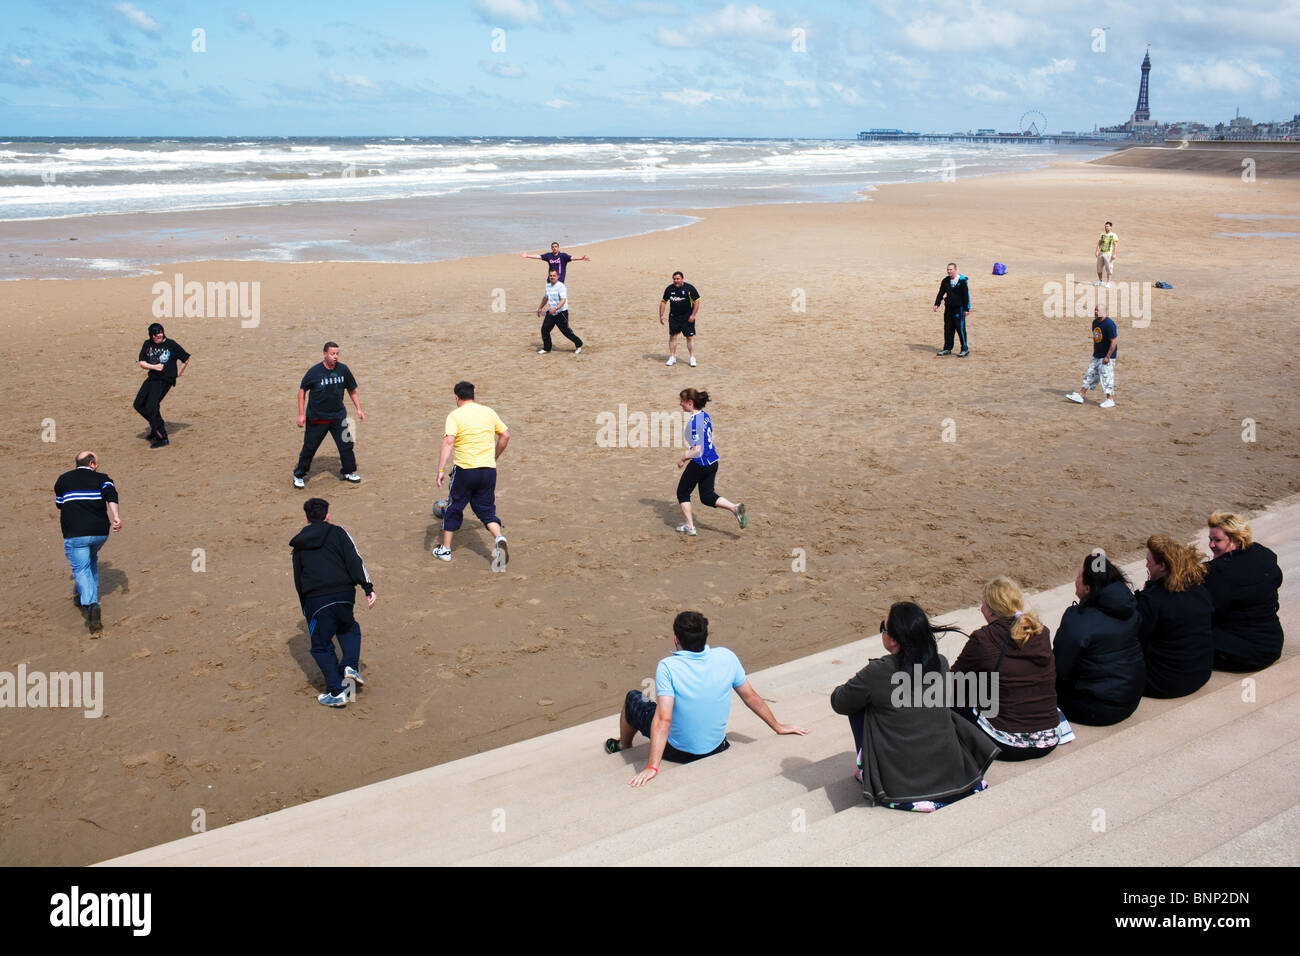 A group of people plays a football match on the beach in Blackpool, England. Stock Photo